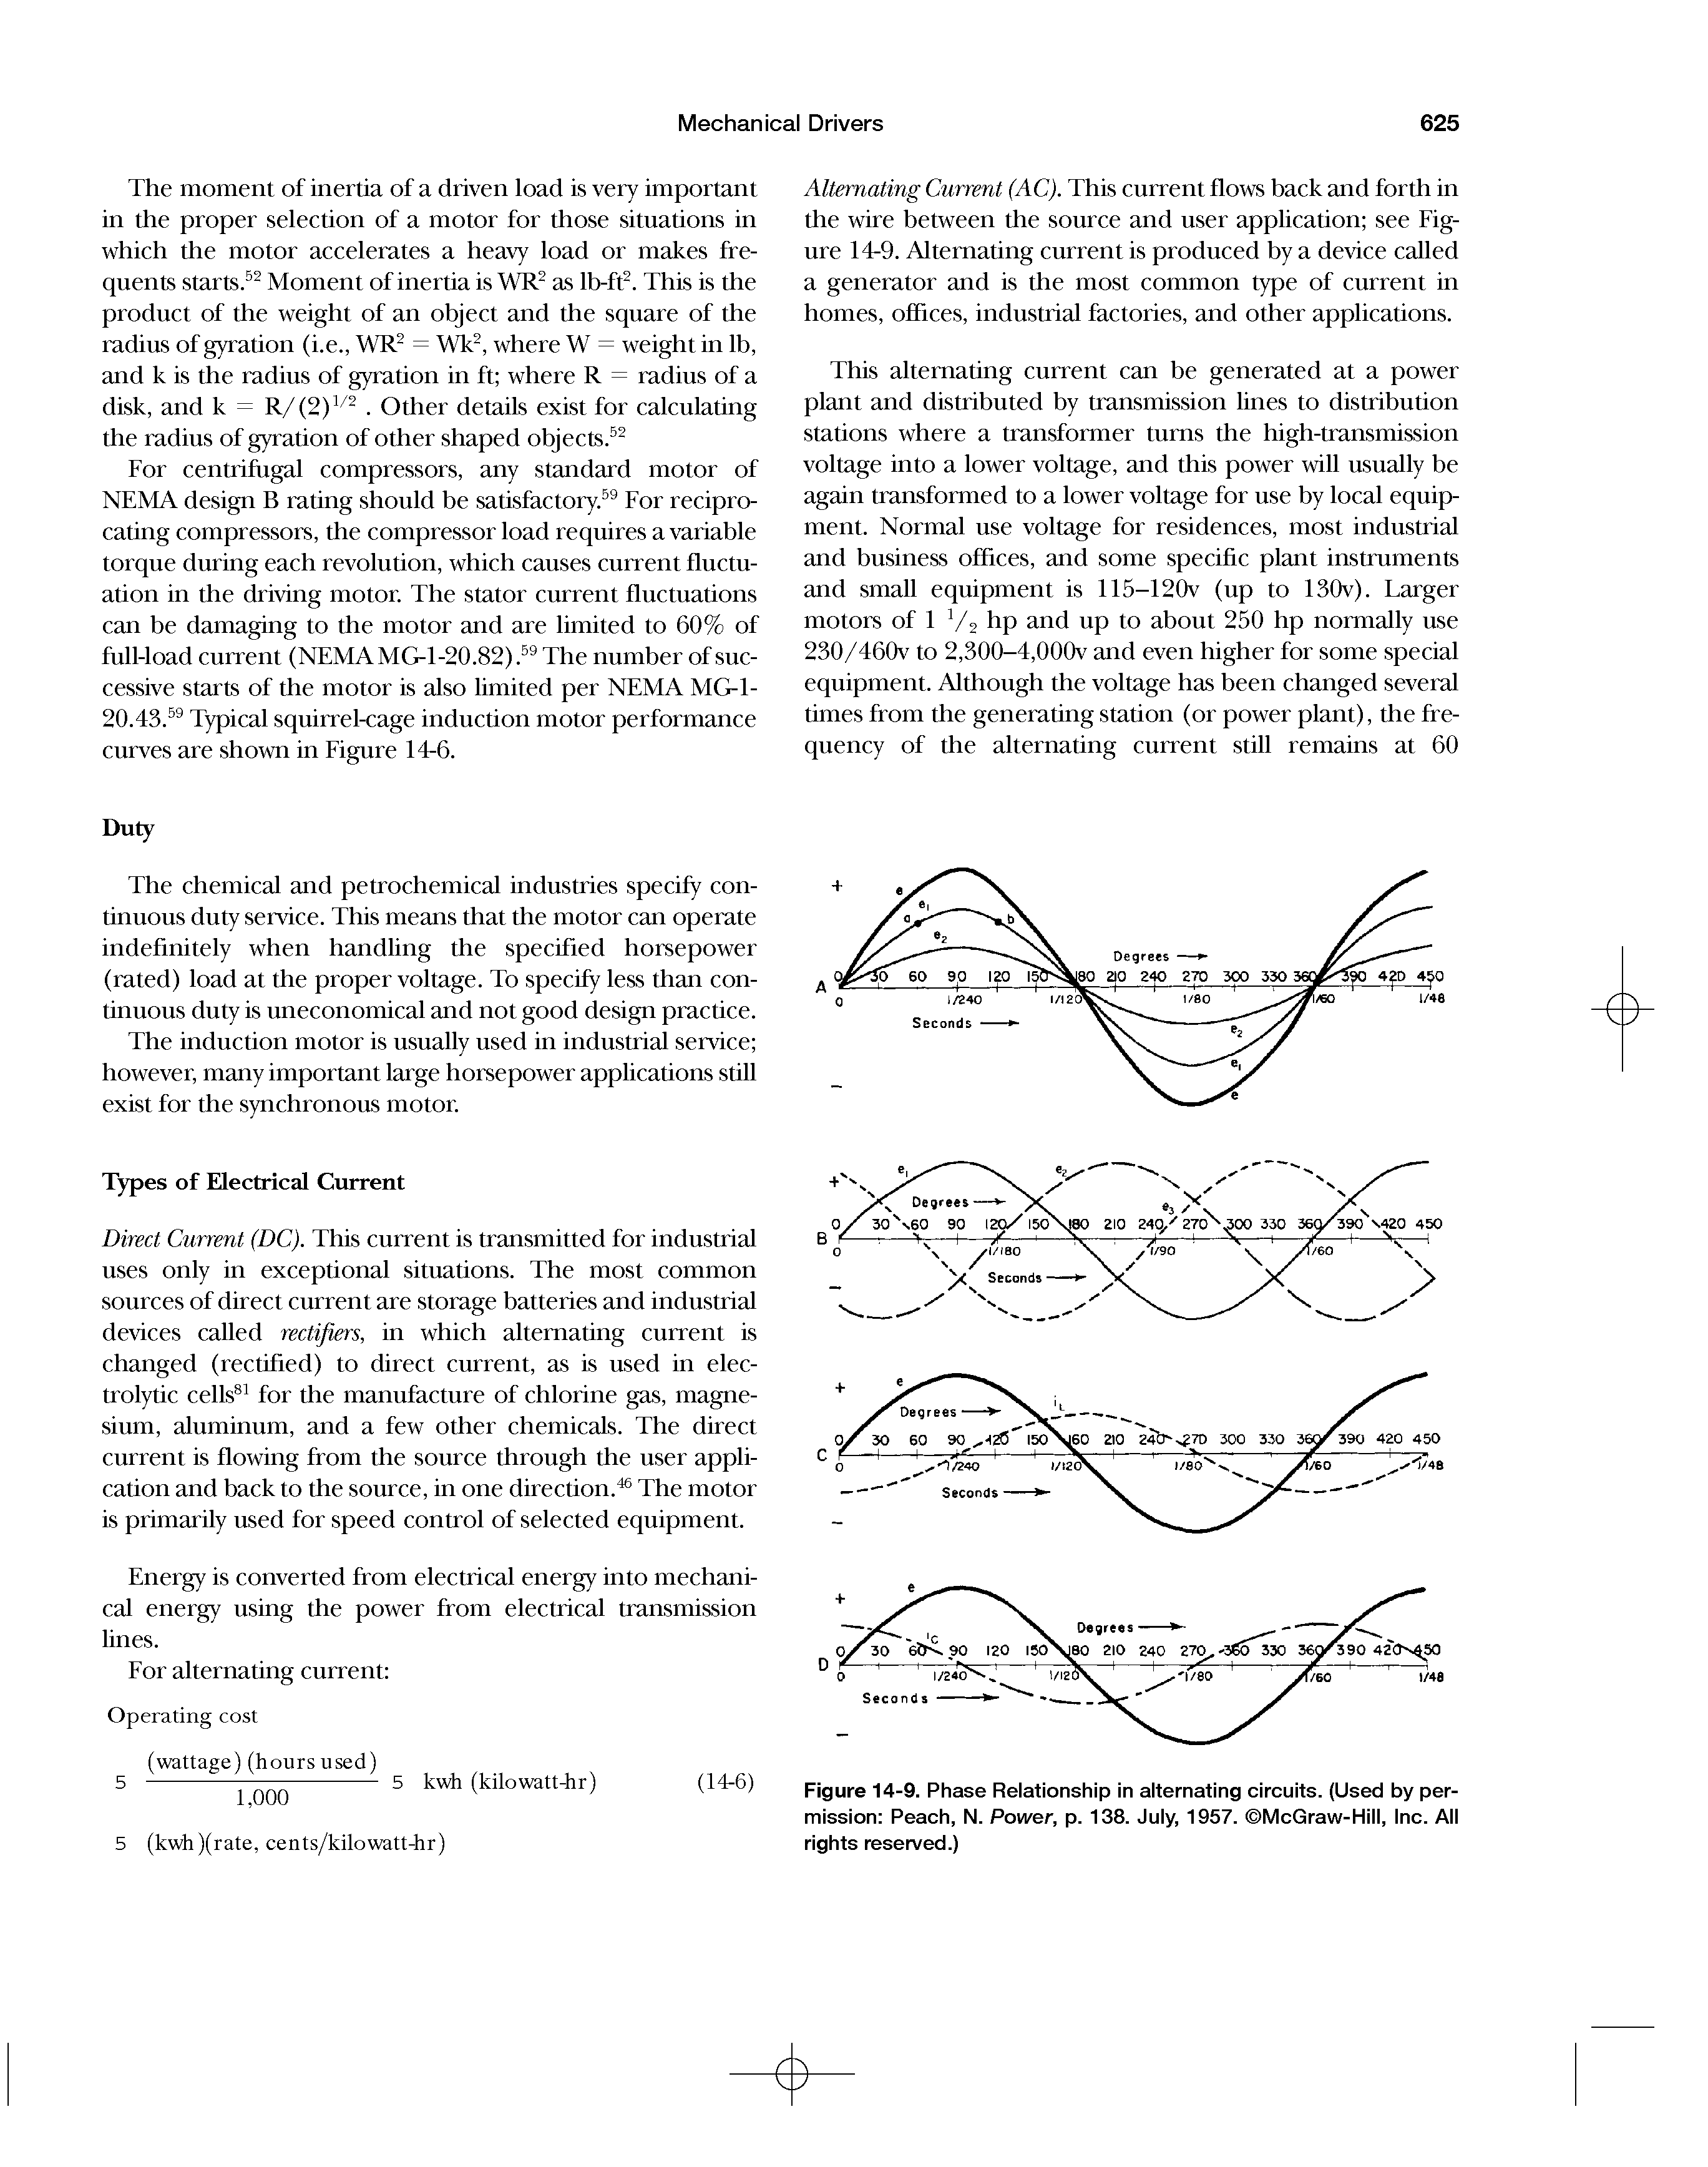 Figure 14-9. Phase Relationship in alternating circuits. (Used by permission Peach, N. Power, p. 138. July, 1957. McGraw-Hill, Inc. All rights reserved.)...